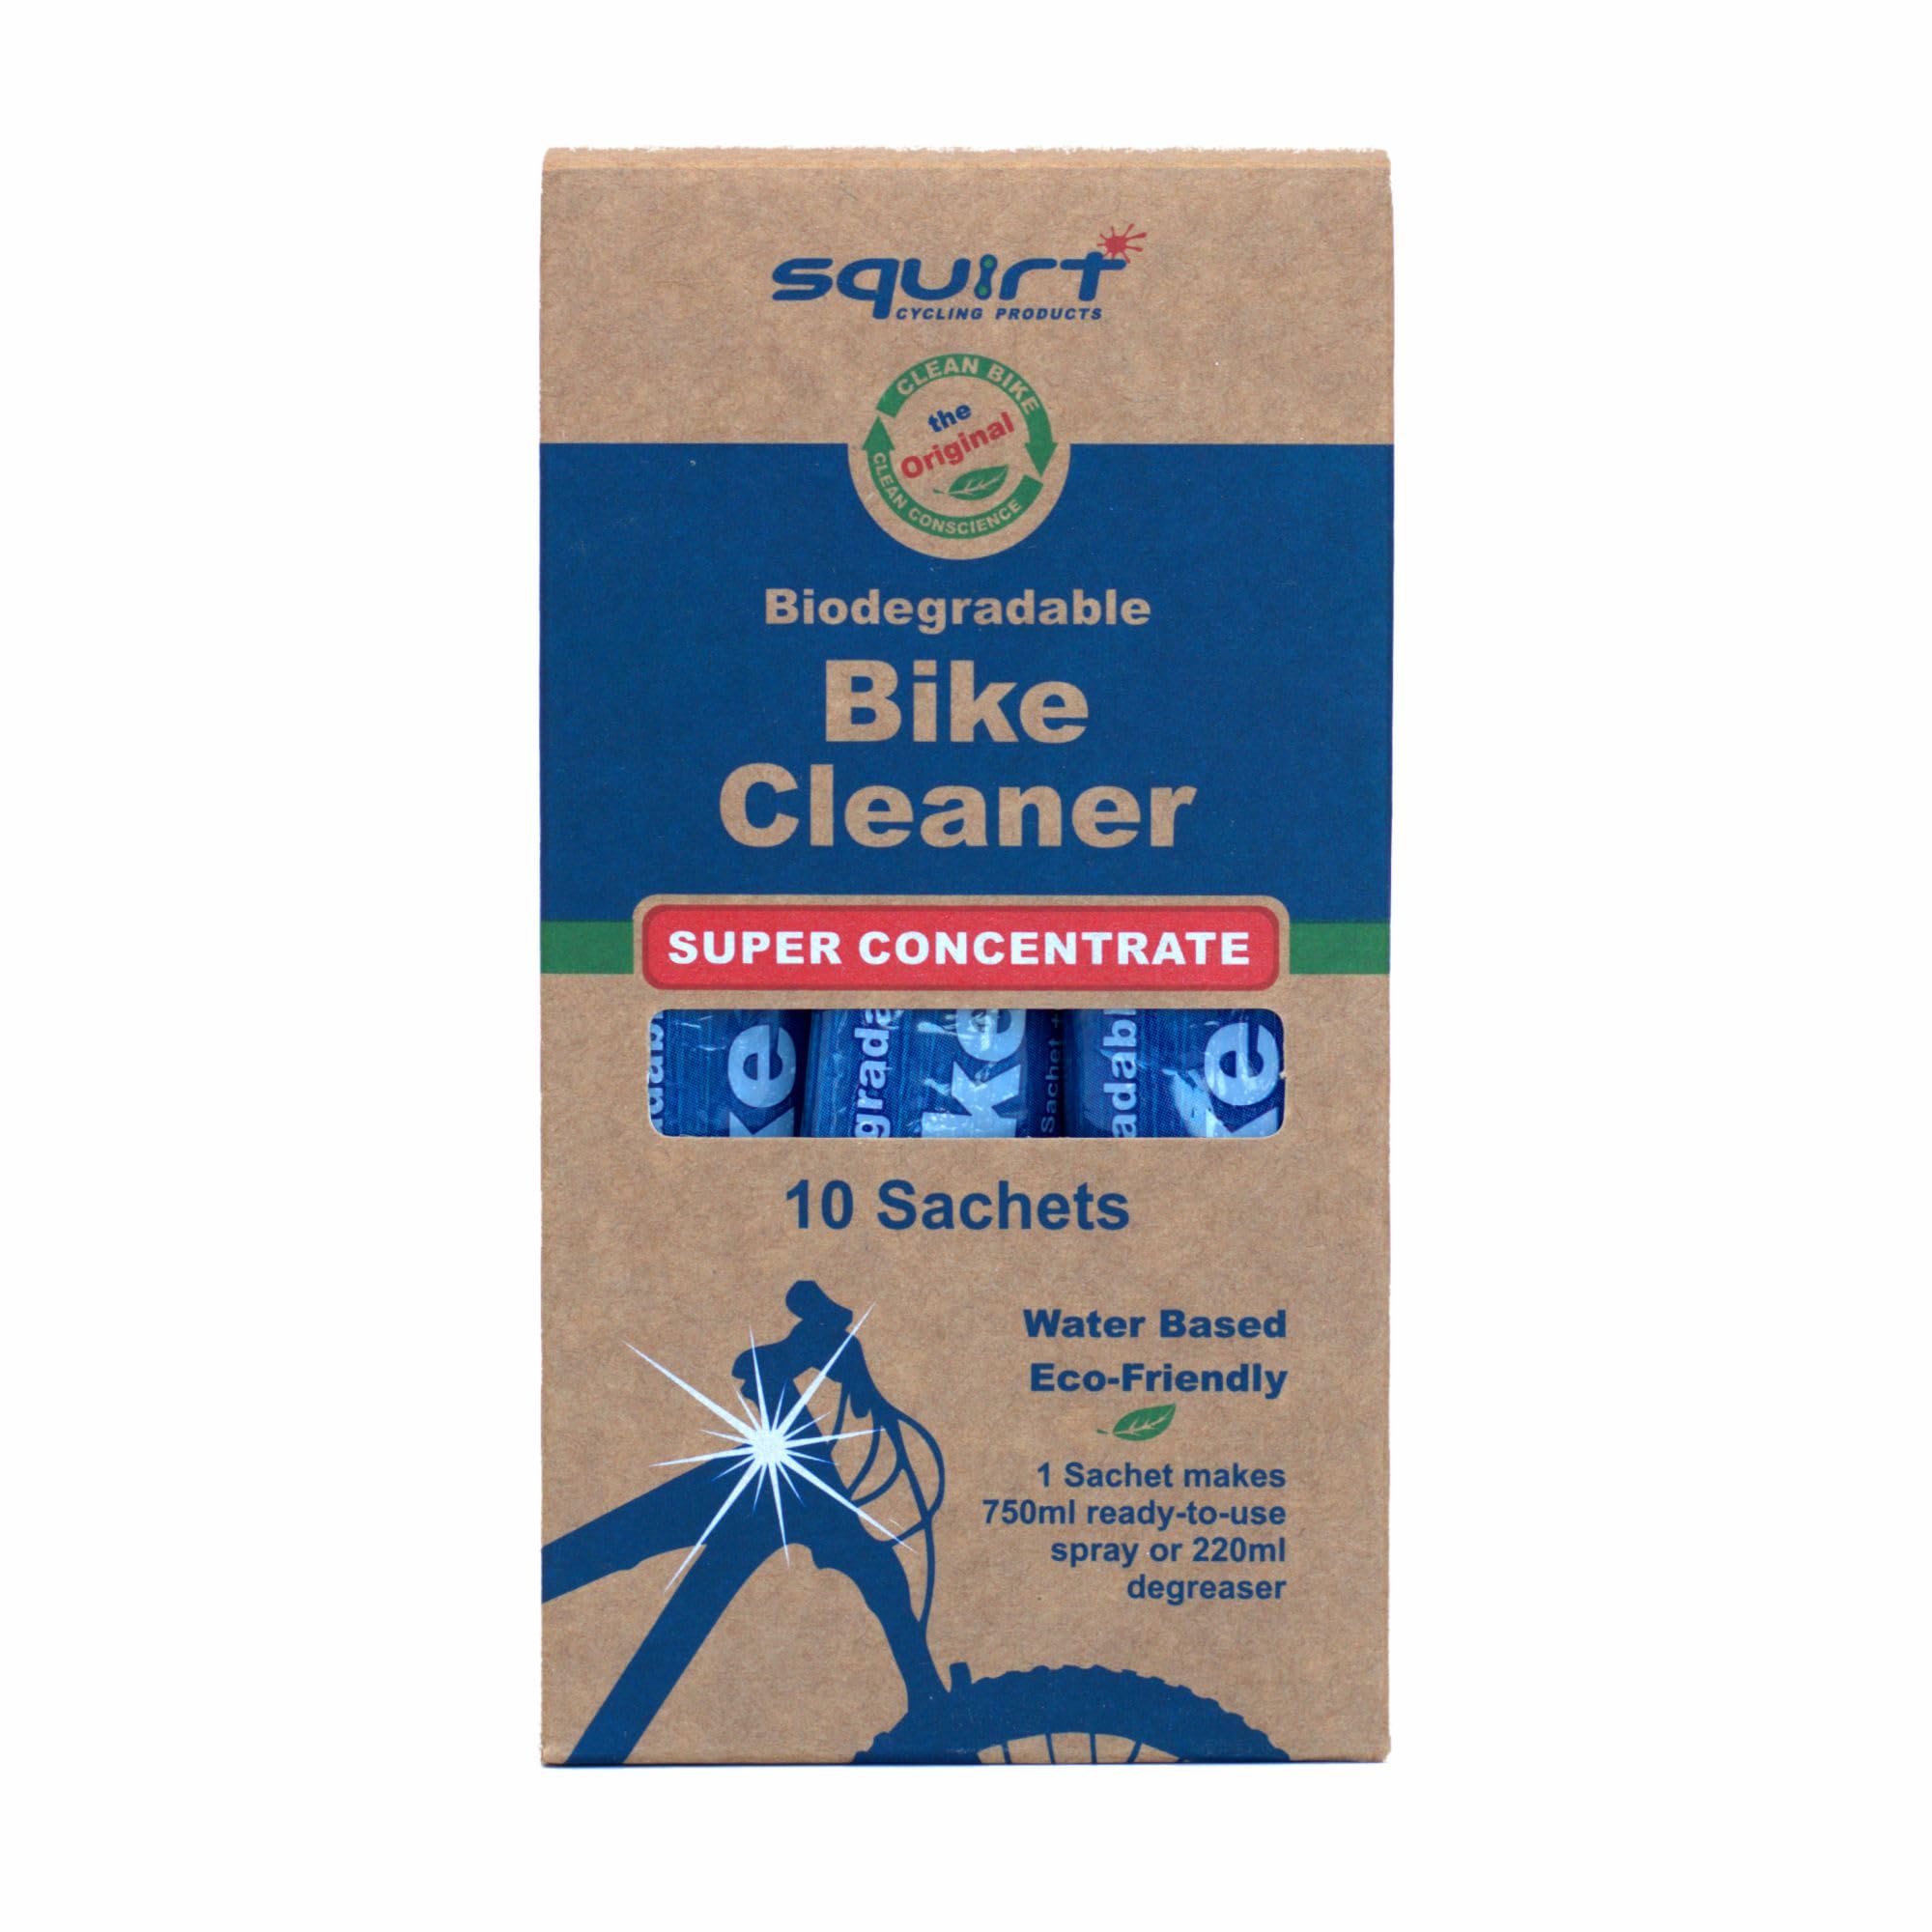 Squirt Bike Cleaner Super Concentrate 10 Sachets